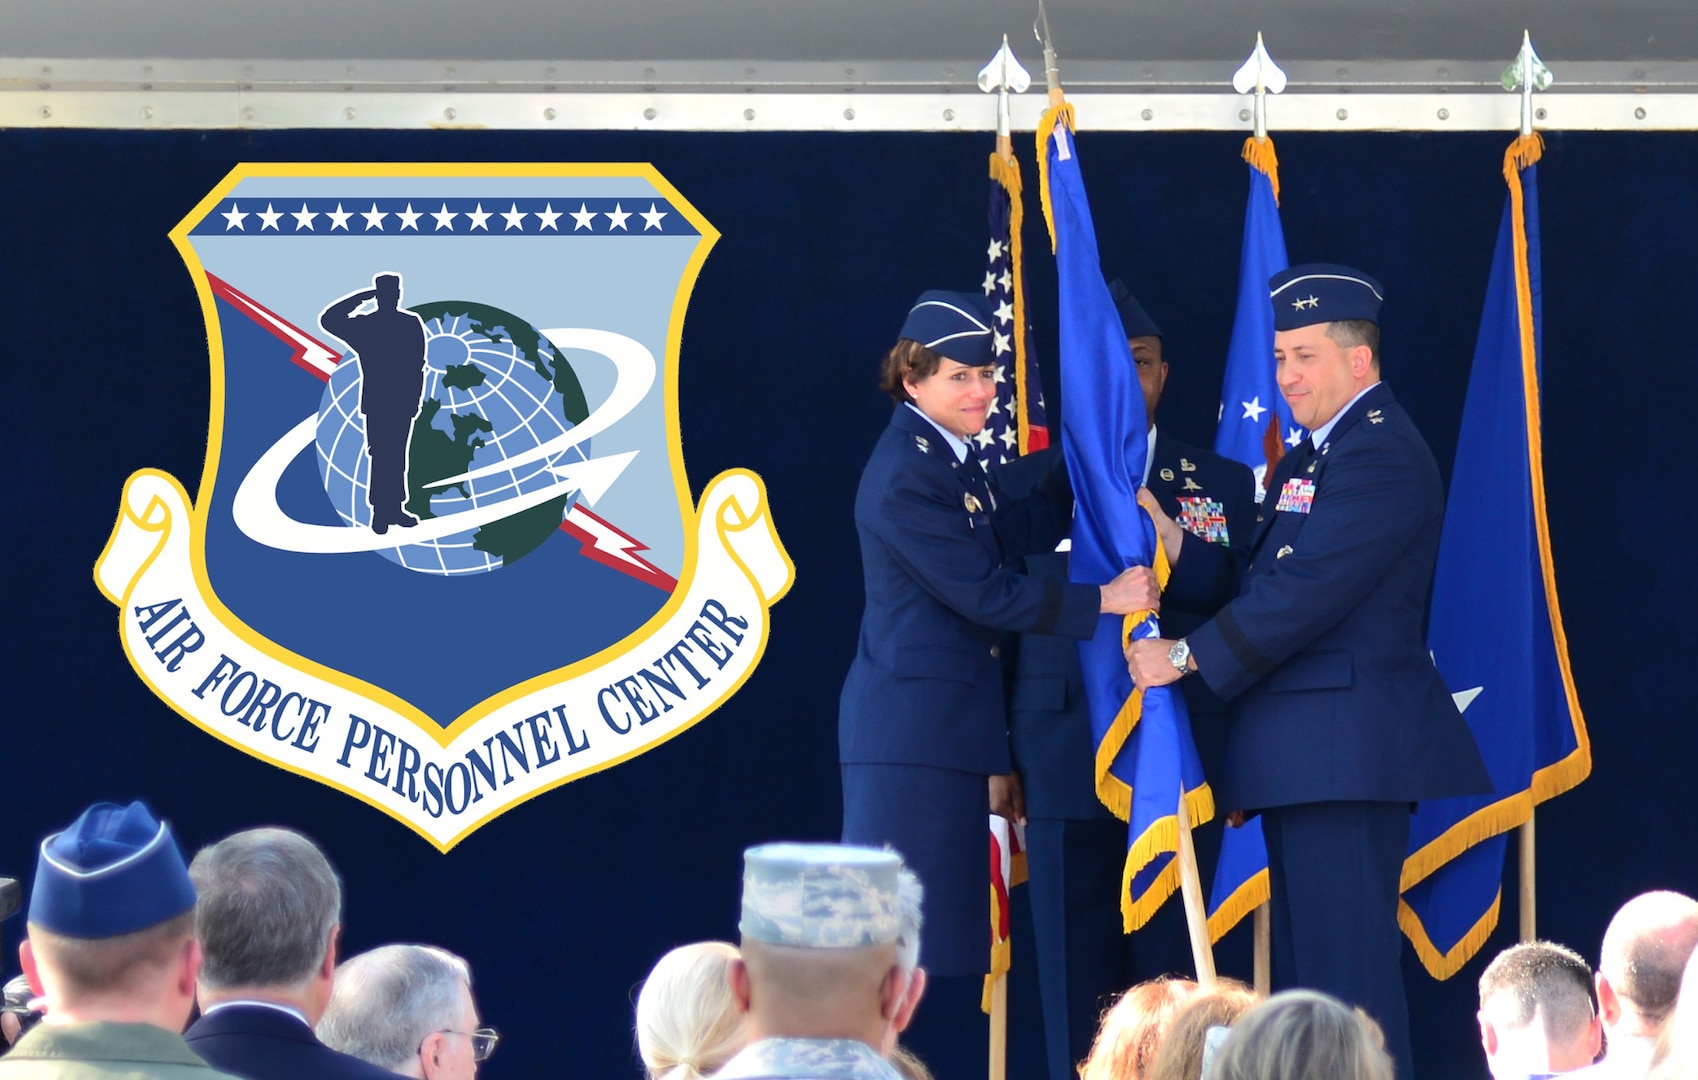 U.S. Air Force Lt. Gen. Gina Grosso, deputy chief of staff for manpower, personnel and services, presents the headquarters guidon to Maj. Gen. Brian Kelly, incoming Air Force Personnel Center commander, during a change of command ceremony June 23, 2017 at Joint Base San Antonio-Randolph, Texas. Kelly assumed this role as Maj. Gen. Peggy Poore formally relinquished command after several years of dedicated service. 